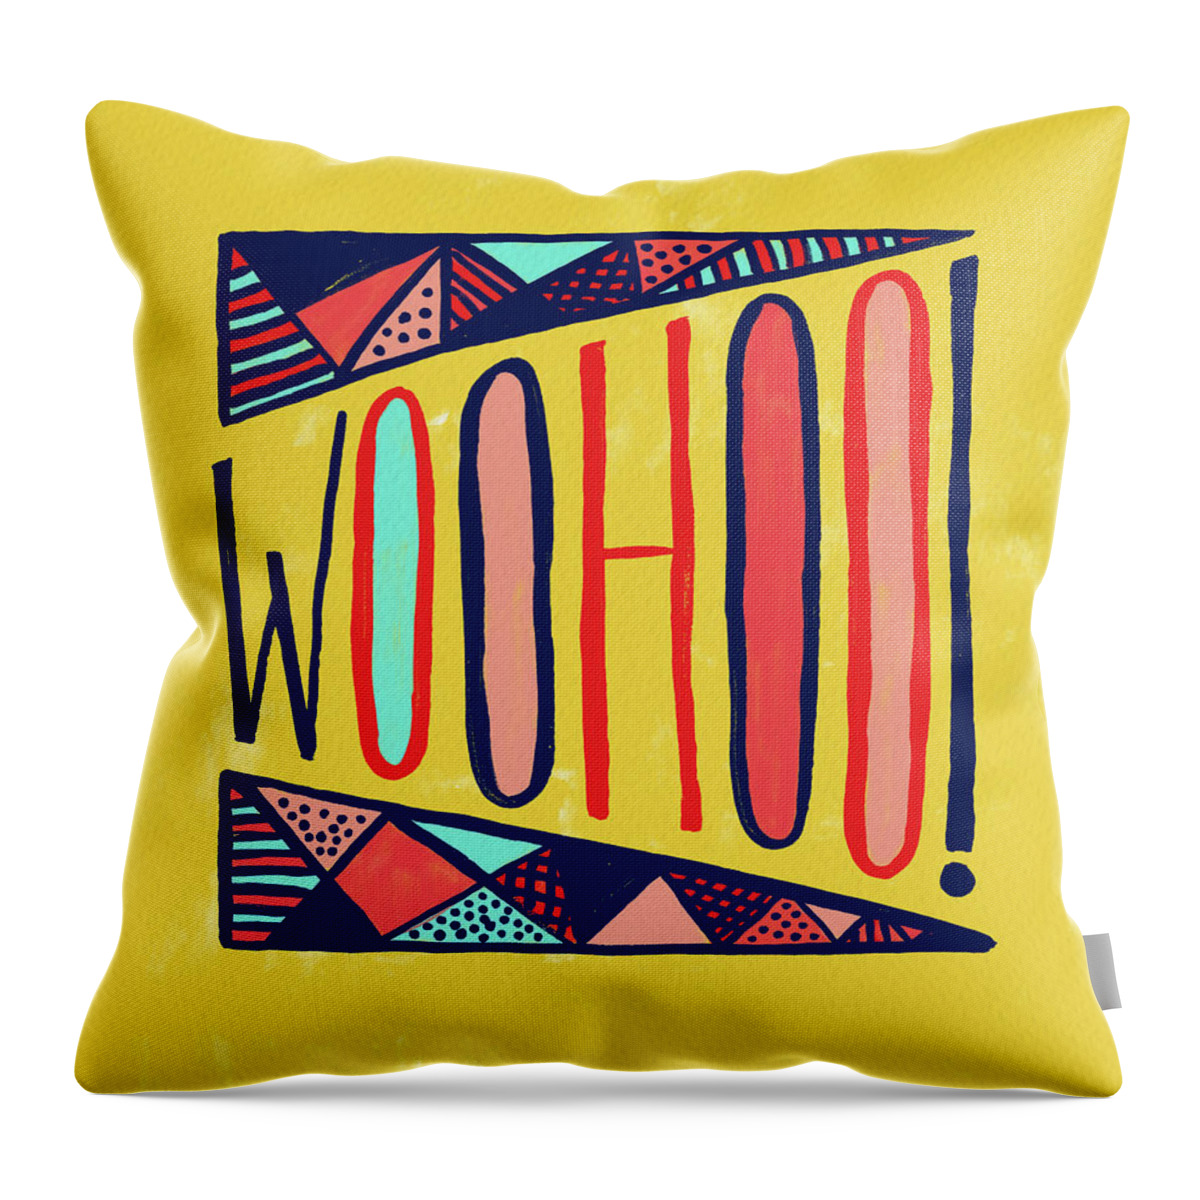 Woohoo Throw Pillow featuring the painting Woohoo by Jen Montgomery